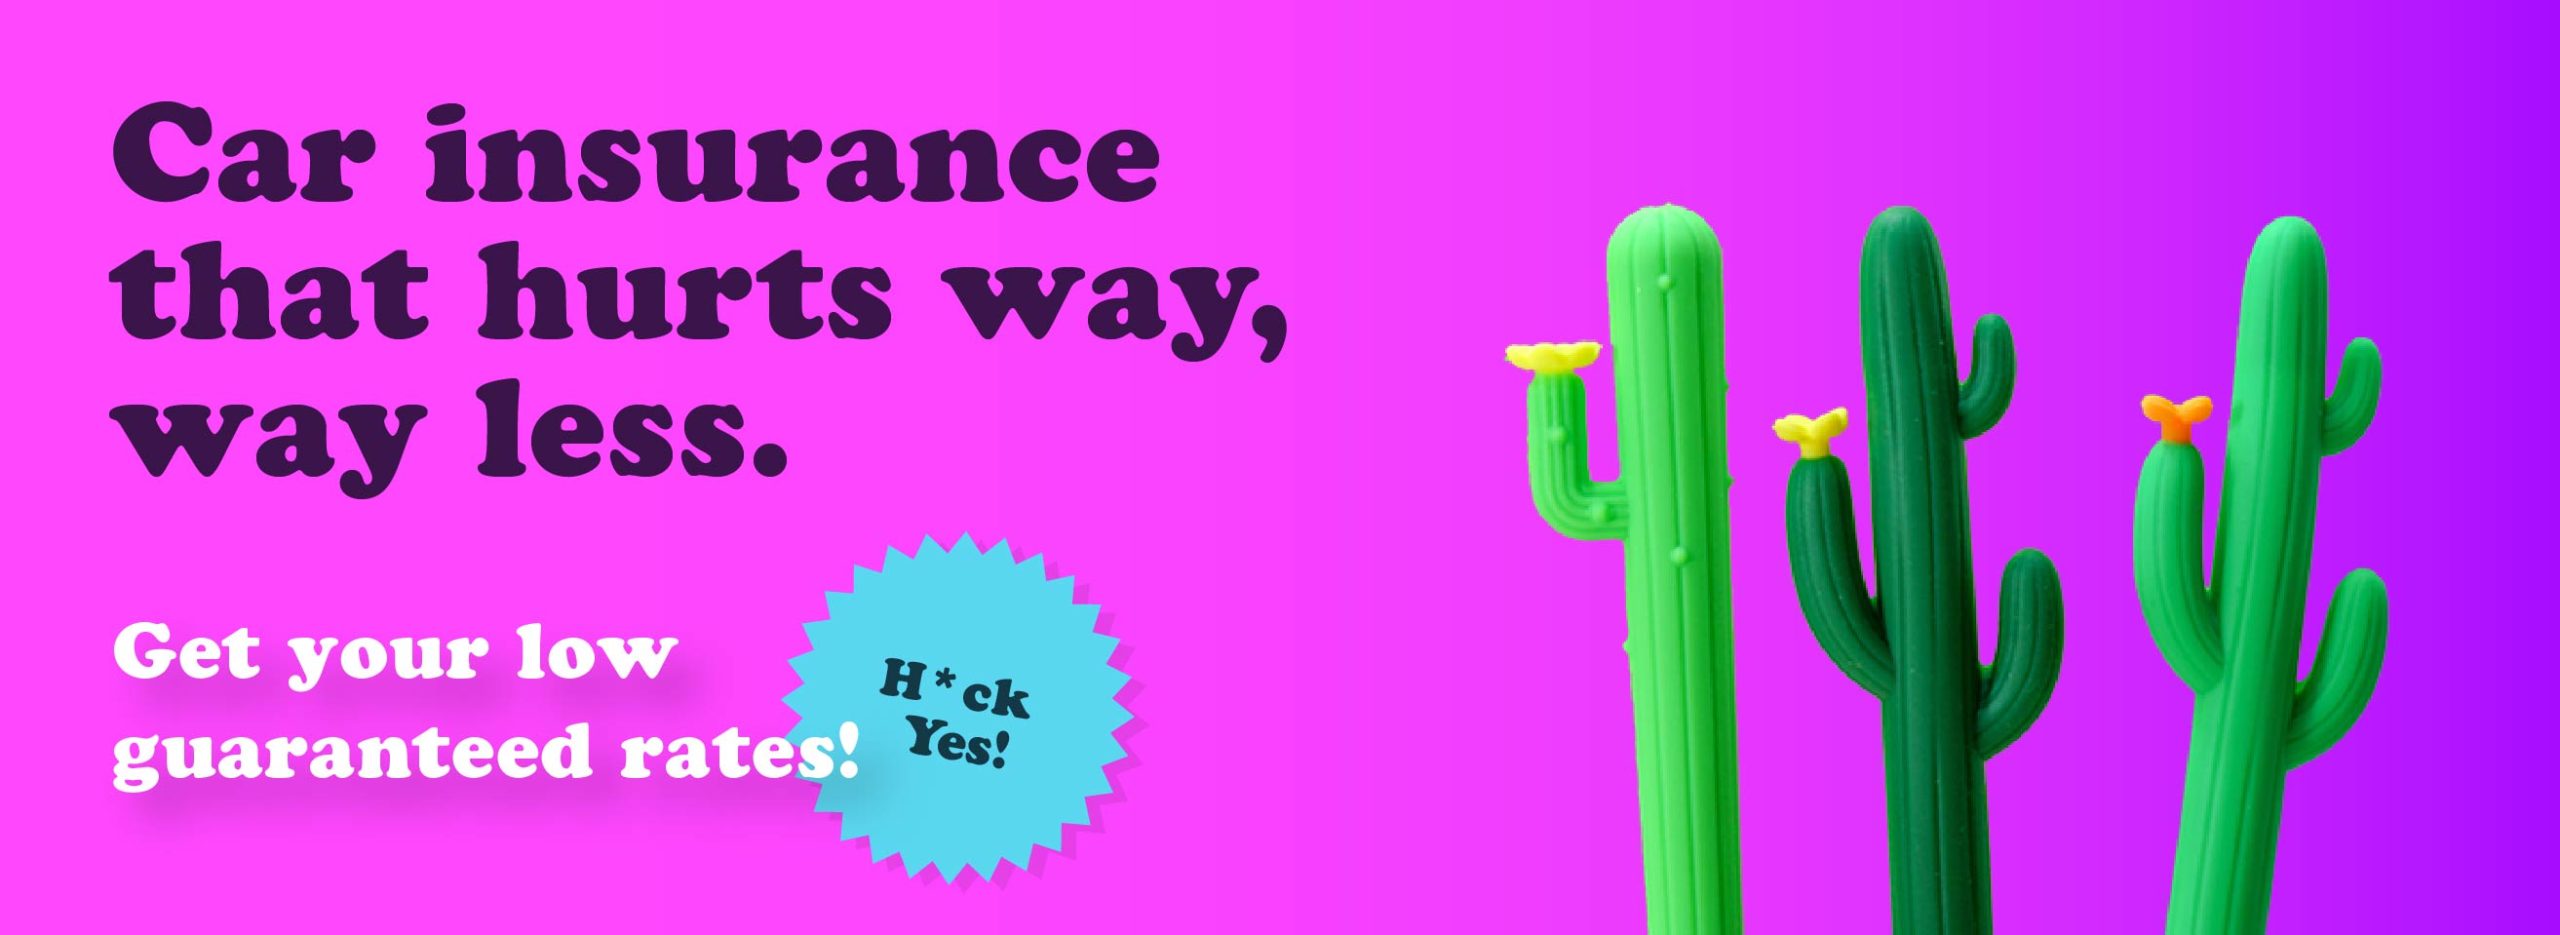 "Car insurance that hurts way, way less." beside three smooth green plastic cacti